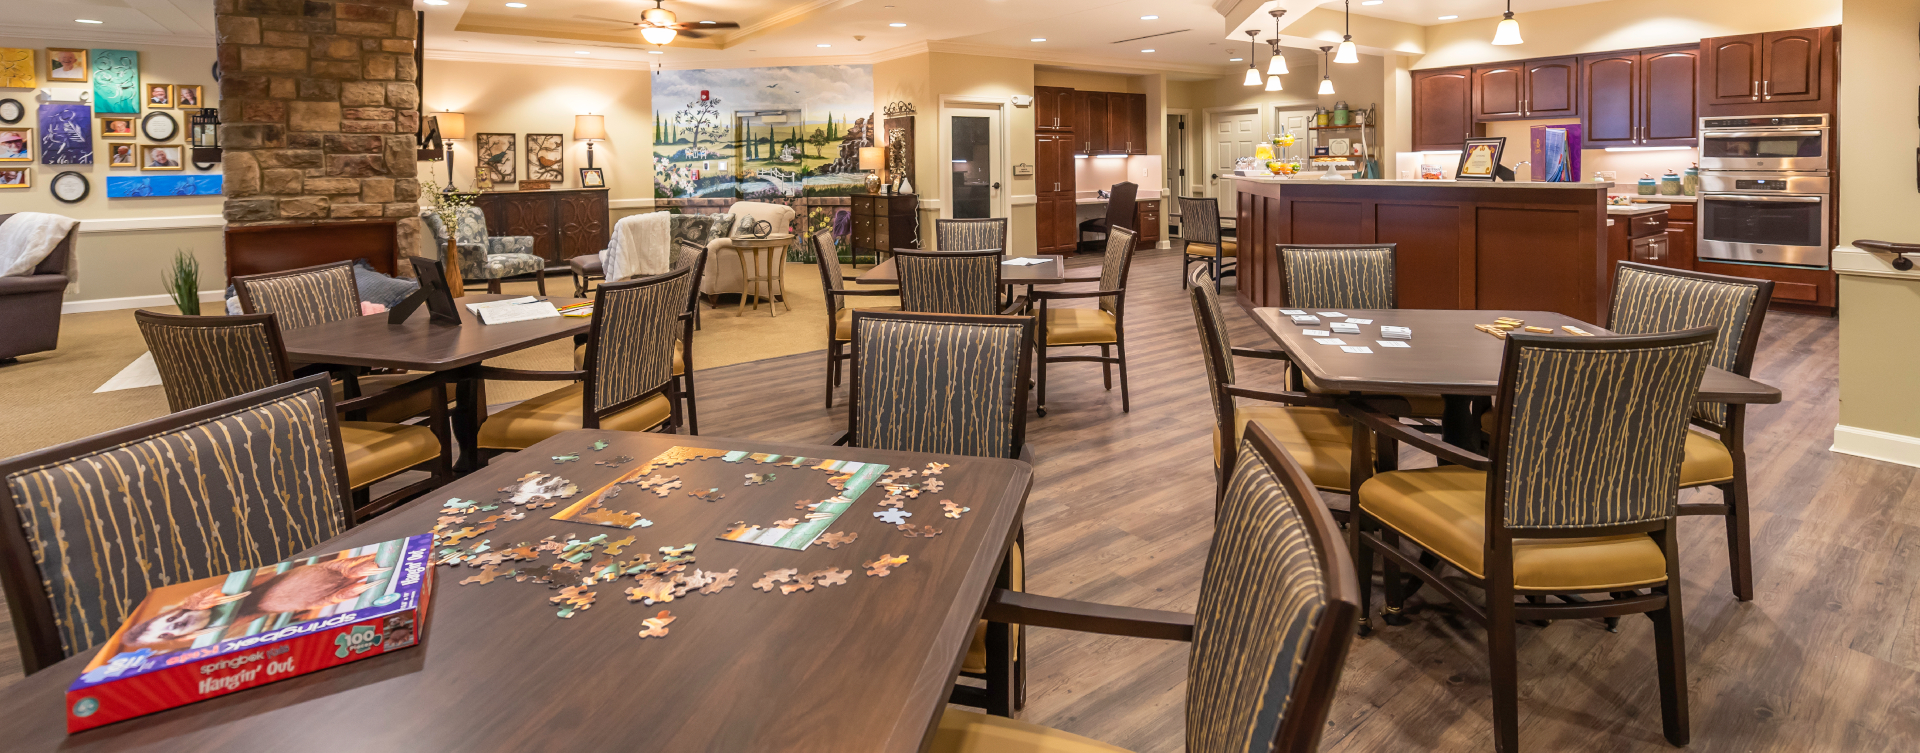 Mary B’s country kitchen evokes a sense of home and reconnects residents to past life skills at Bickford of Shelby Township